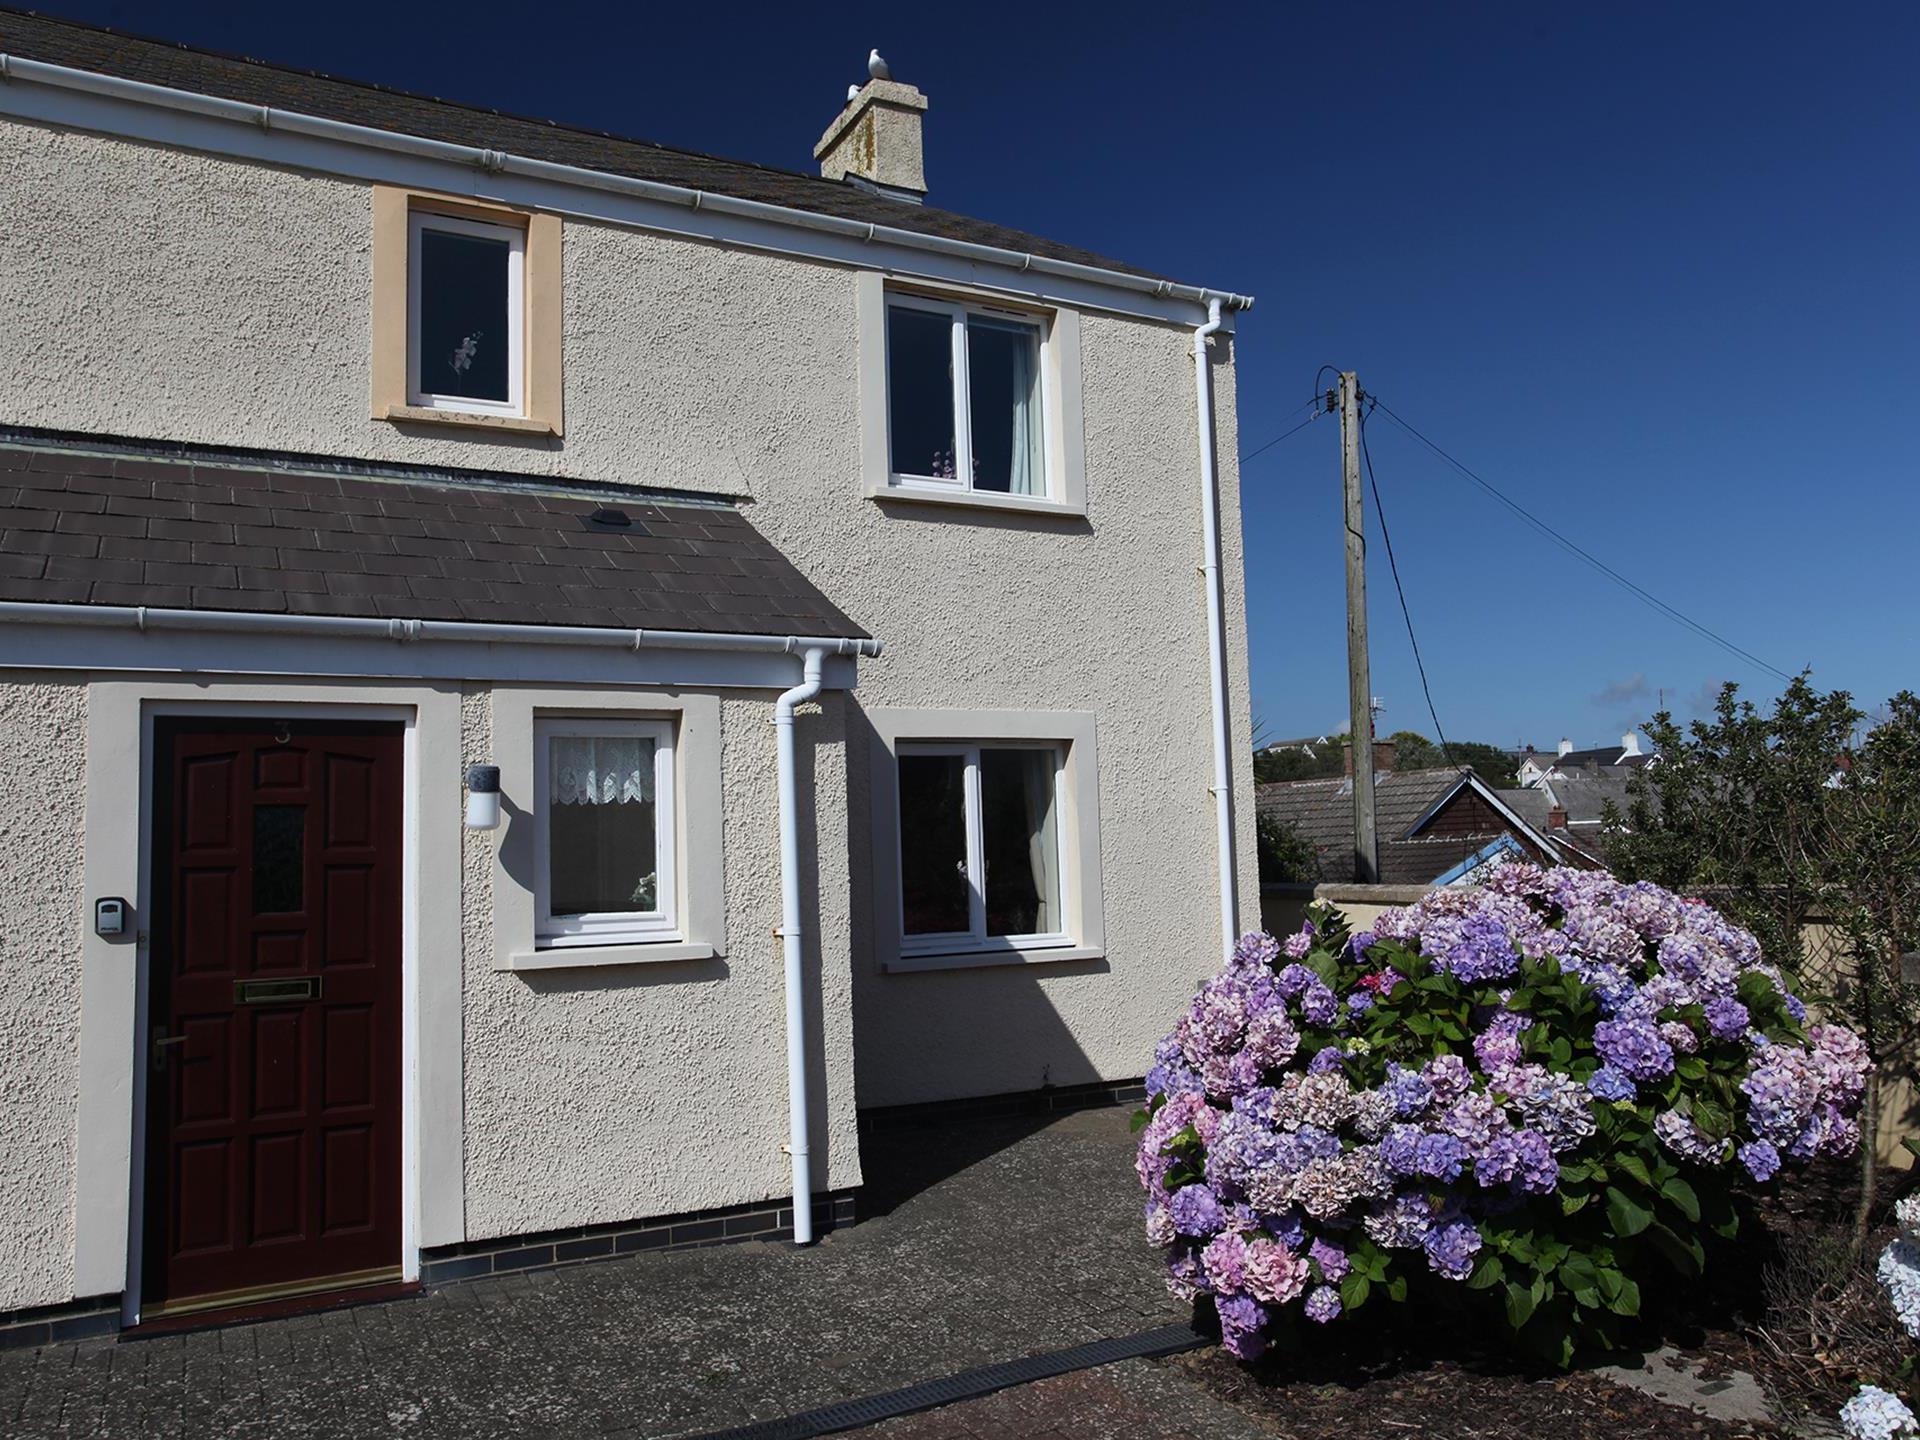 3 The Anchorage is a holiday apartment in Solva